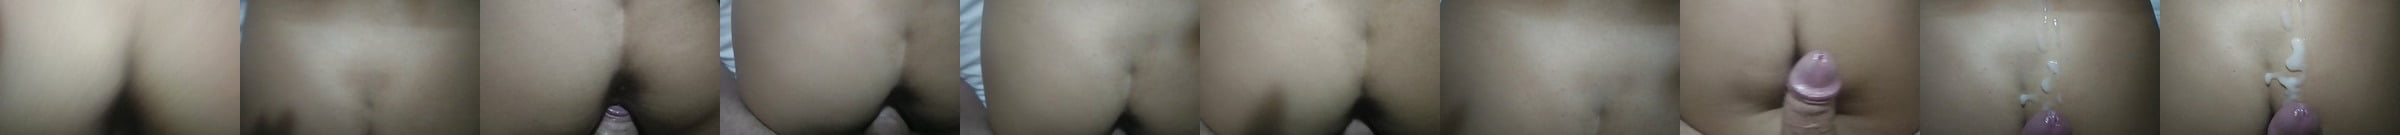 Amateur Quick Sex In The Balcony Of A Hotel Room In Xhamster 